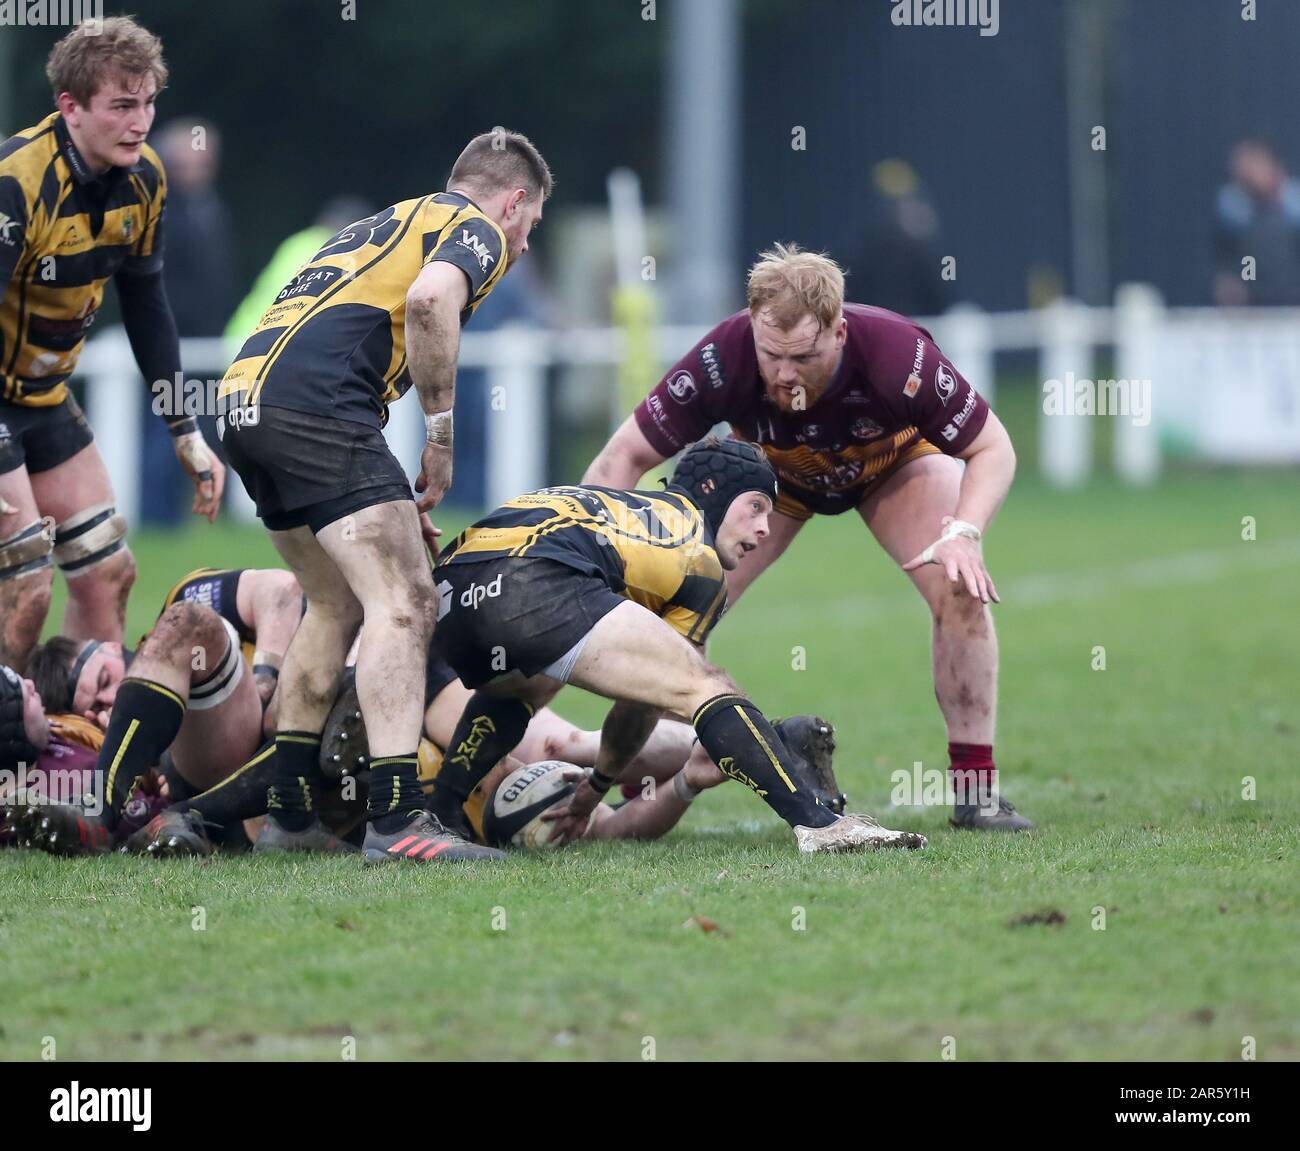 25.01.2020, Hinckley, Leicester, England. Rugby Union, Hinckley rfc v Sedgley Park rfc.    Ben Pointon in action for Hinckley during the RFU National League 2 North (NL2N) game played at the Leicester  Road Stadium. Stock Photo